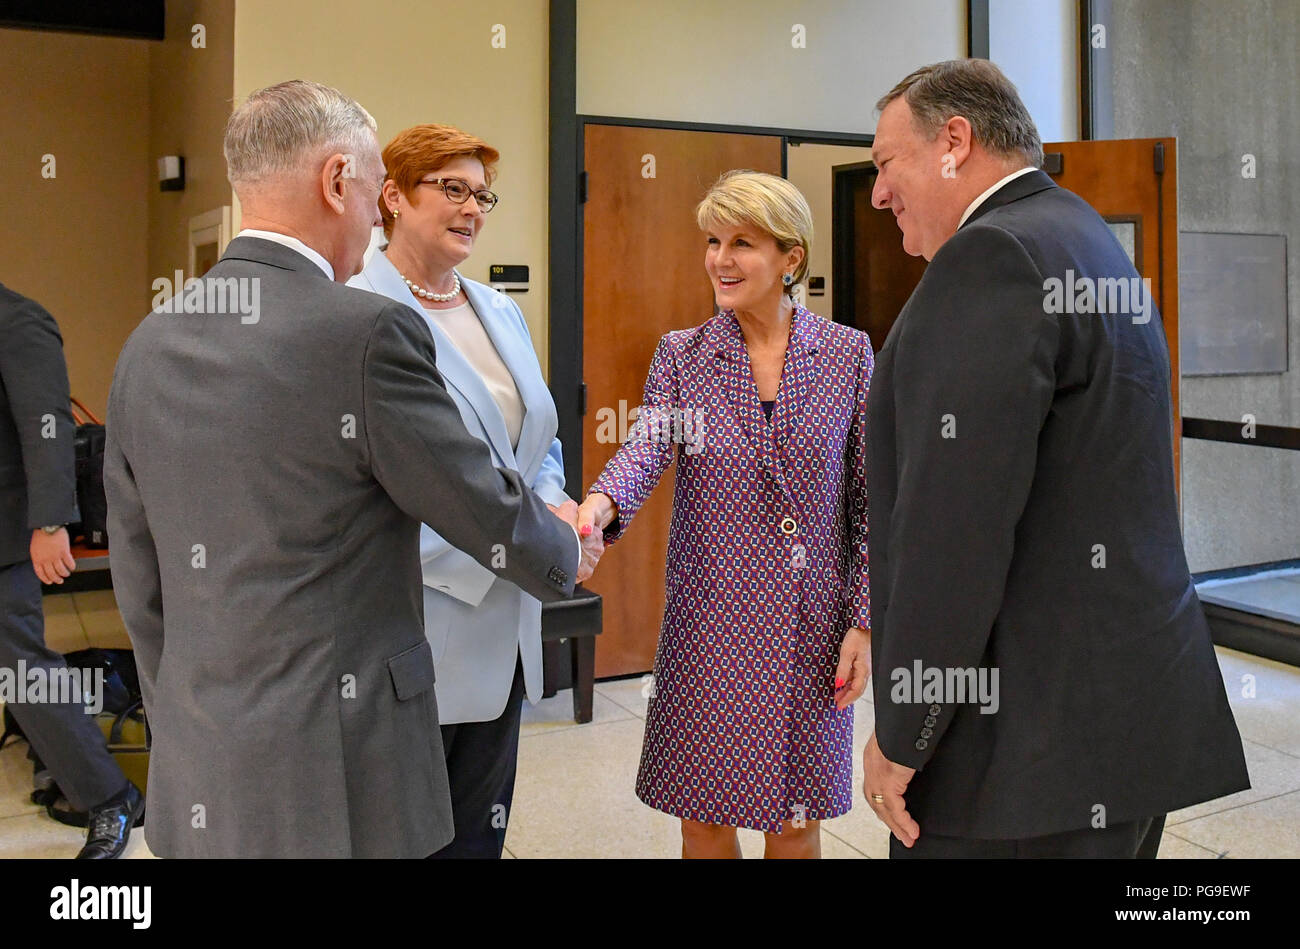 U.S. Secretary of State Michael R. Pompeo chats with U.S. Secretary of Defense James Mattis, Minister for Defence Marise Payne and Australian Foreign Minister Julie Bishop at the Hoover Institution at Stanford University in Palo Alto, California on July 23, 2018. Stock Photo